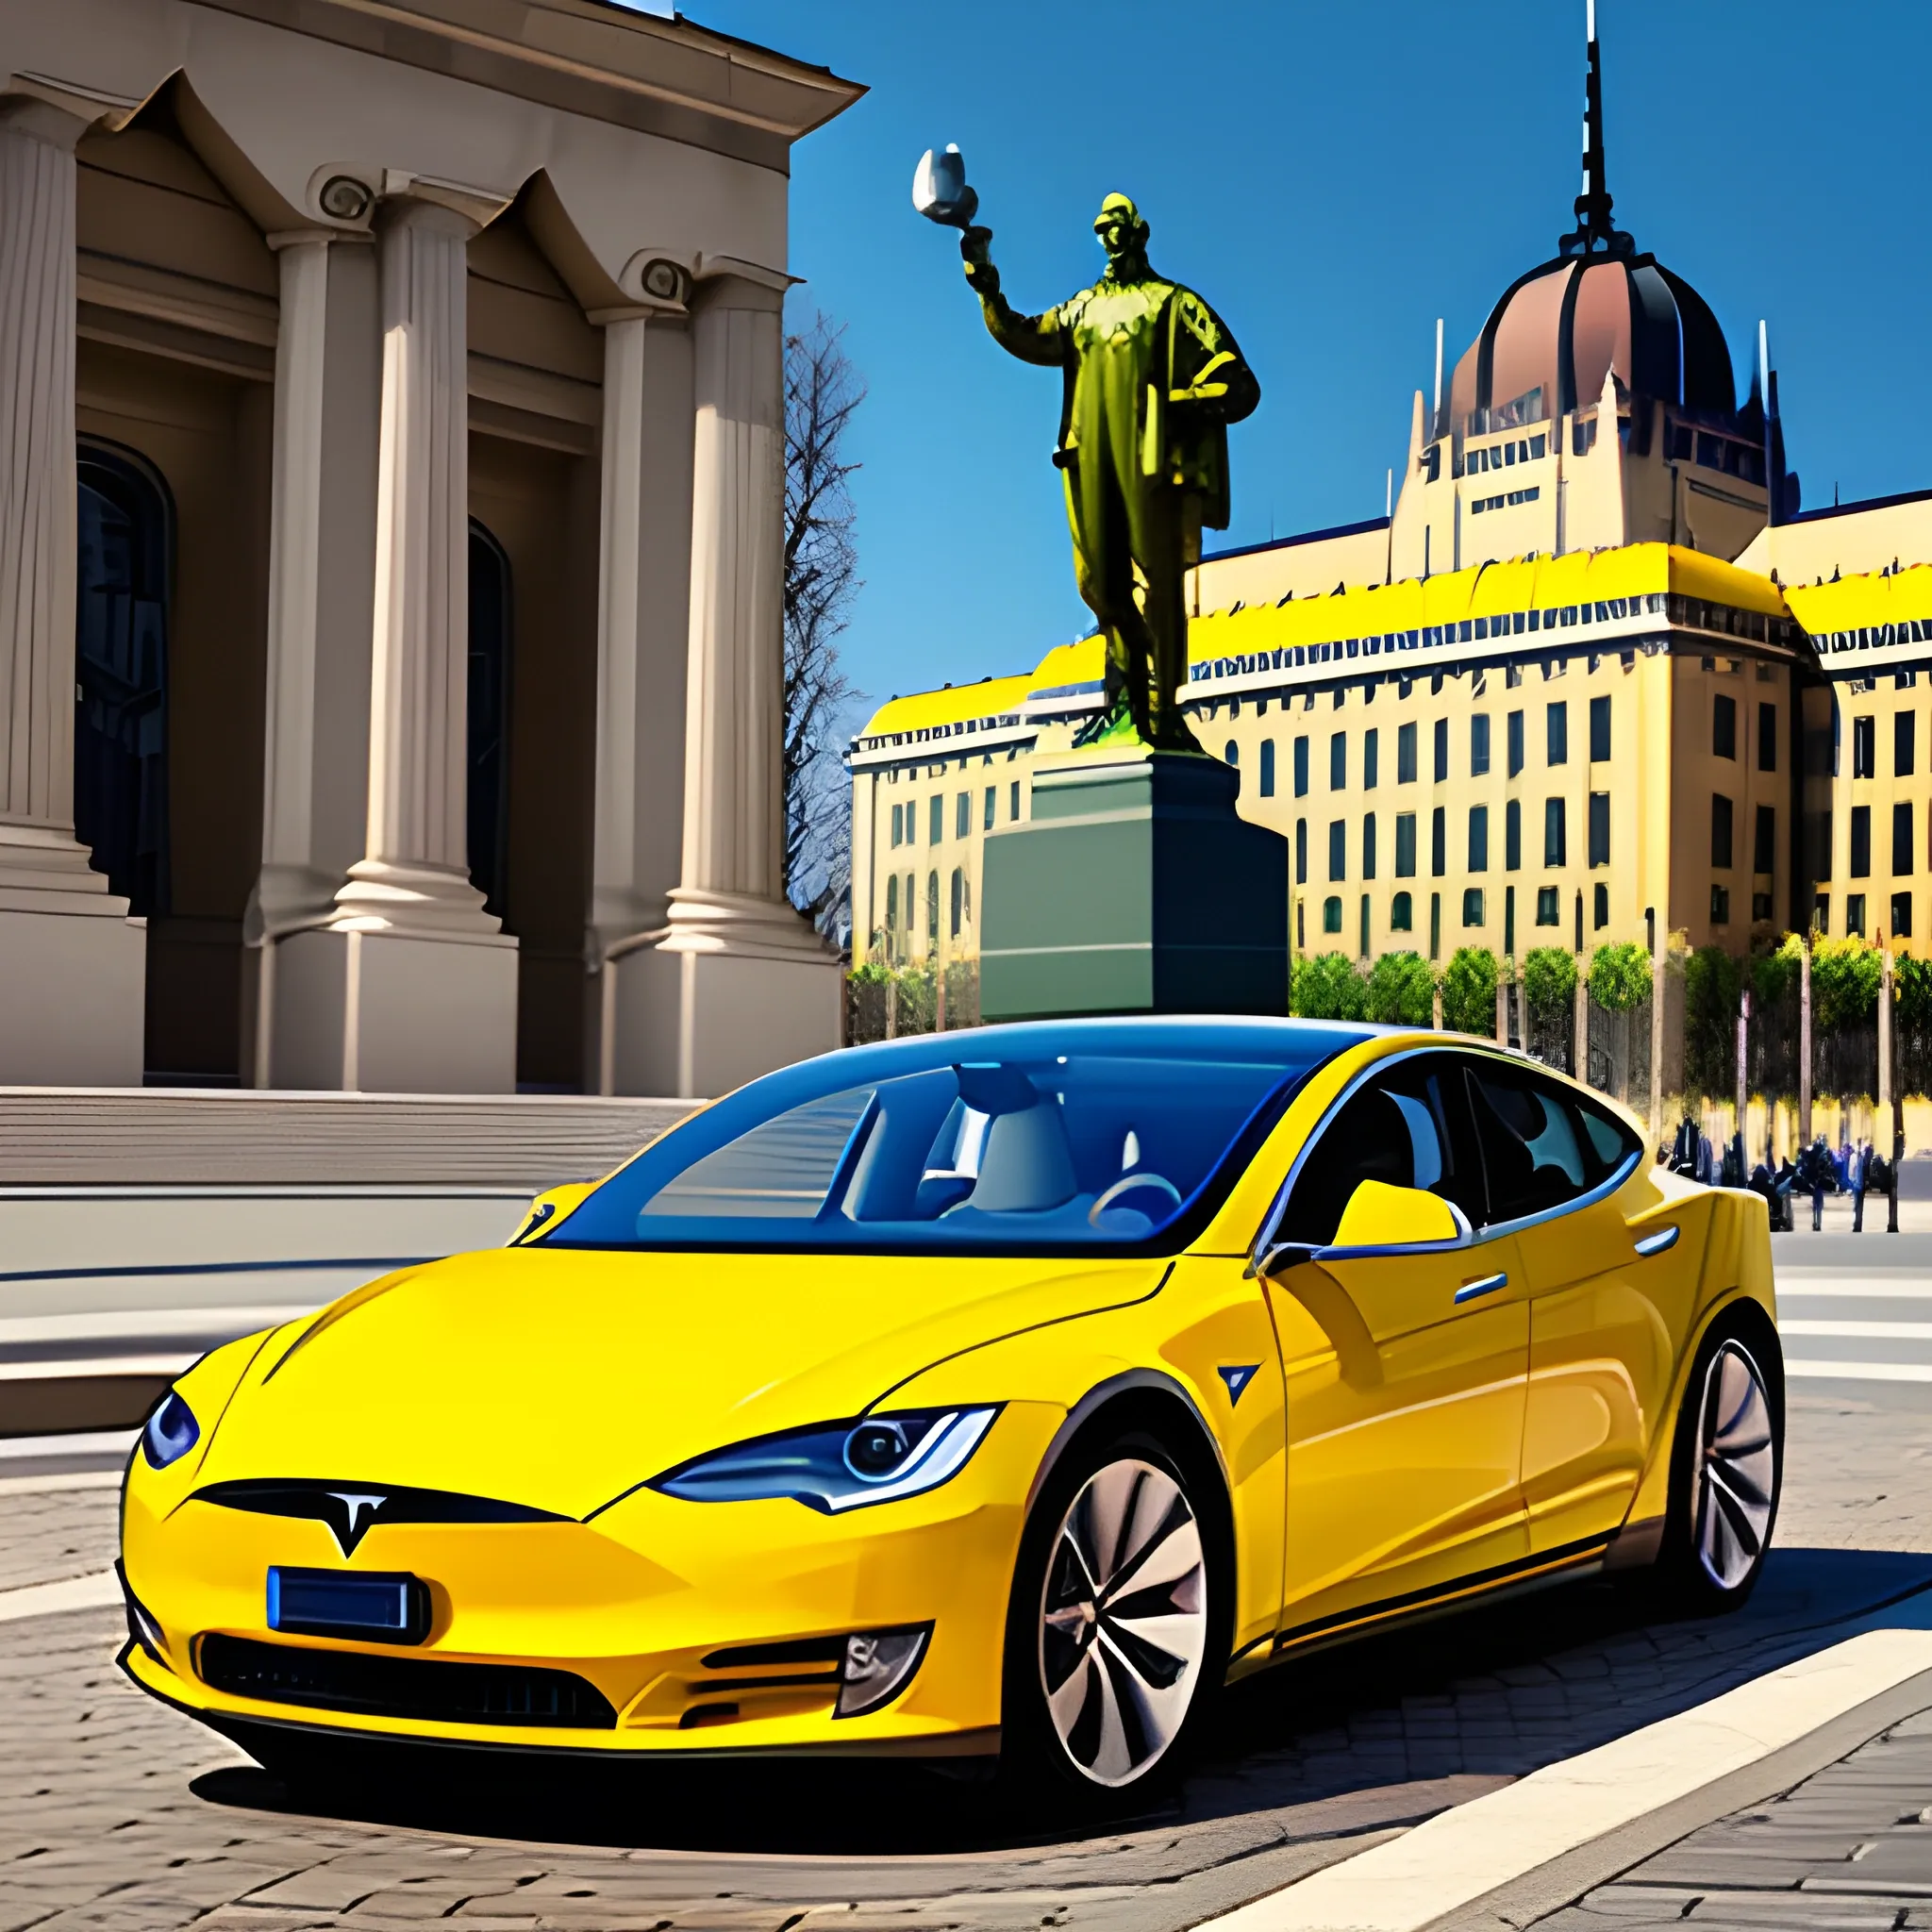 yellow tesla s with green plate wrote on plate TXAA-434 from front view in heroes square budapest
, 3D